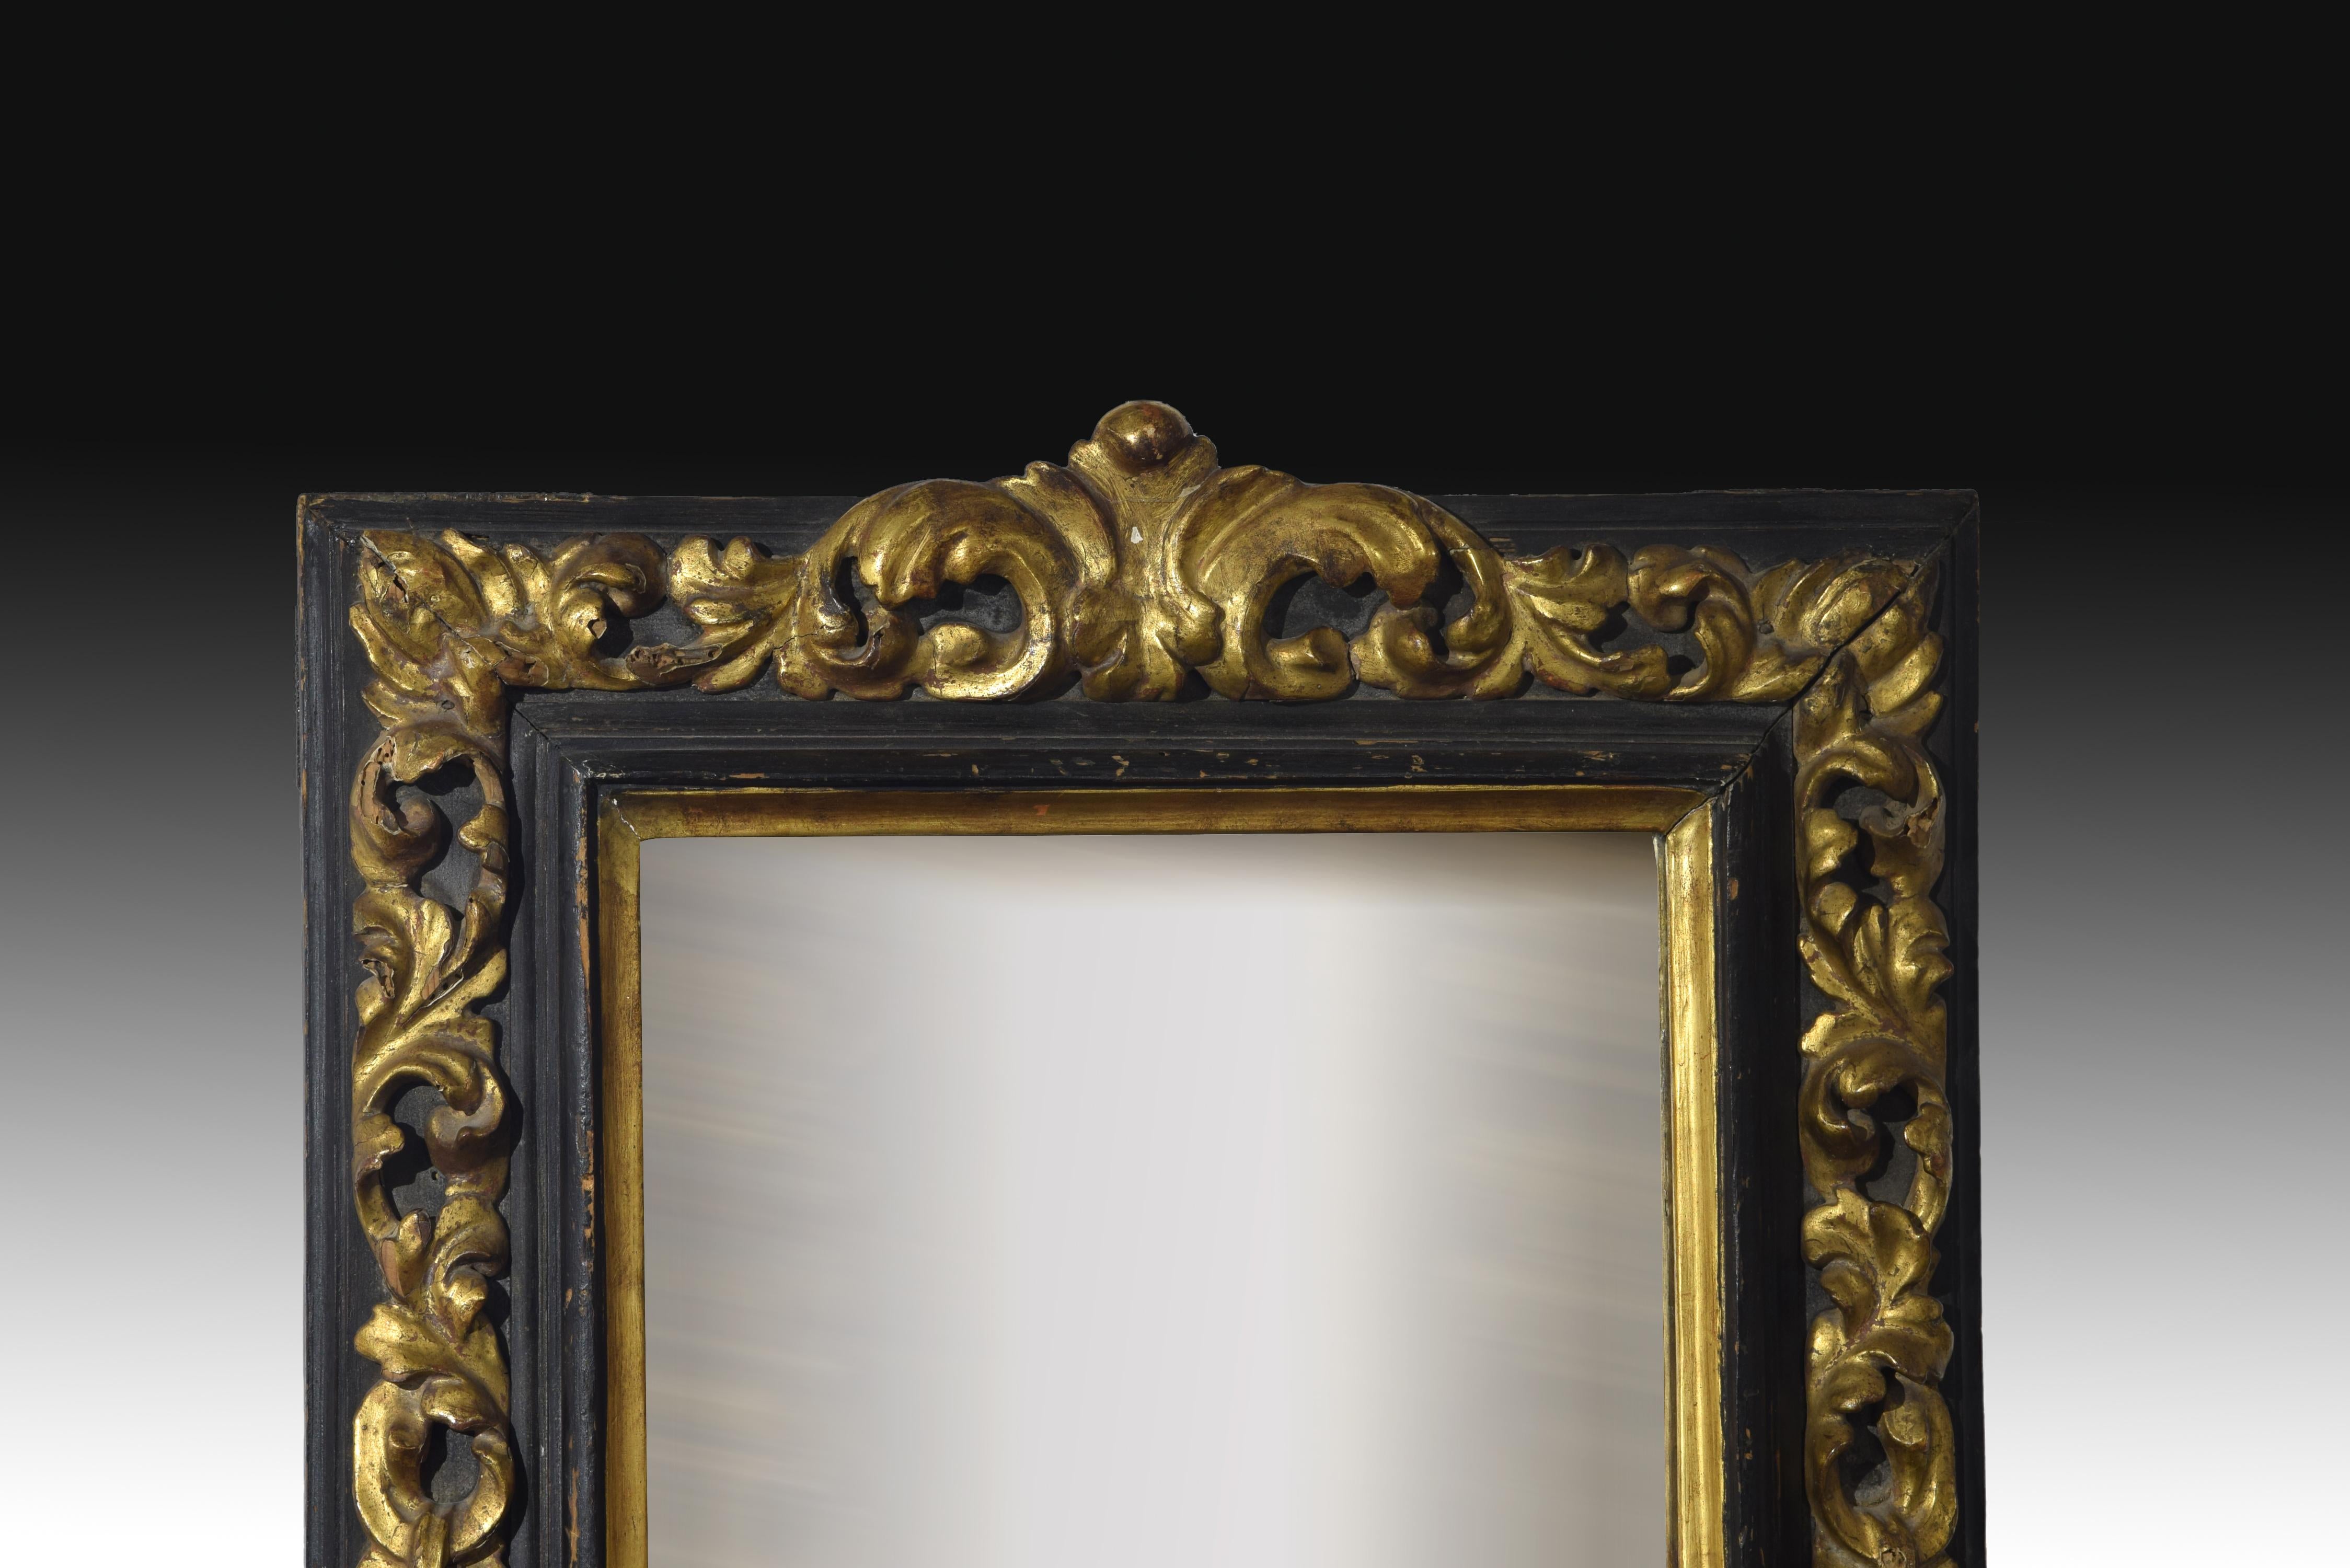 Neoclassical Wooden Frame, 18th Century